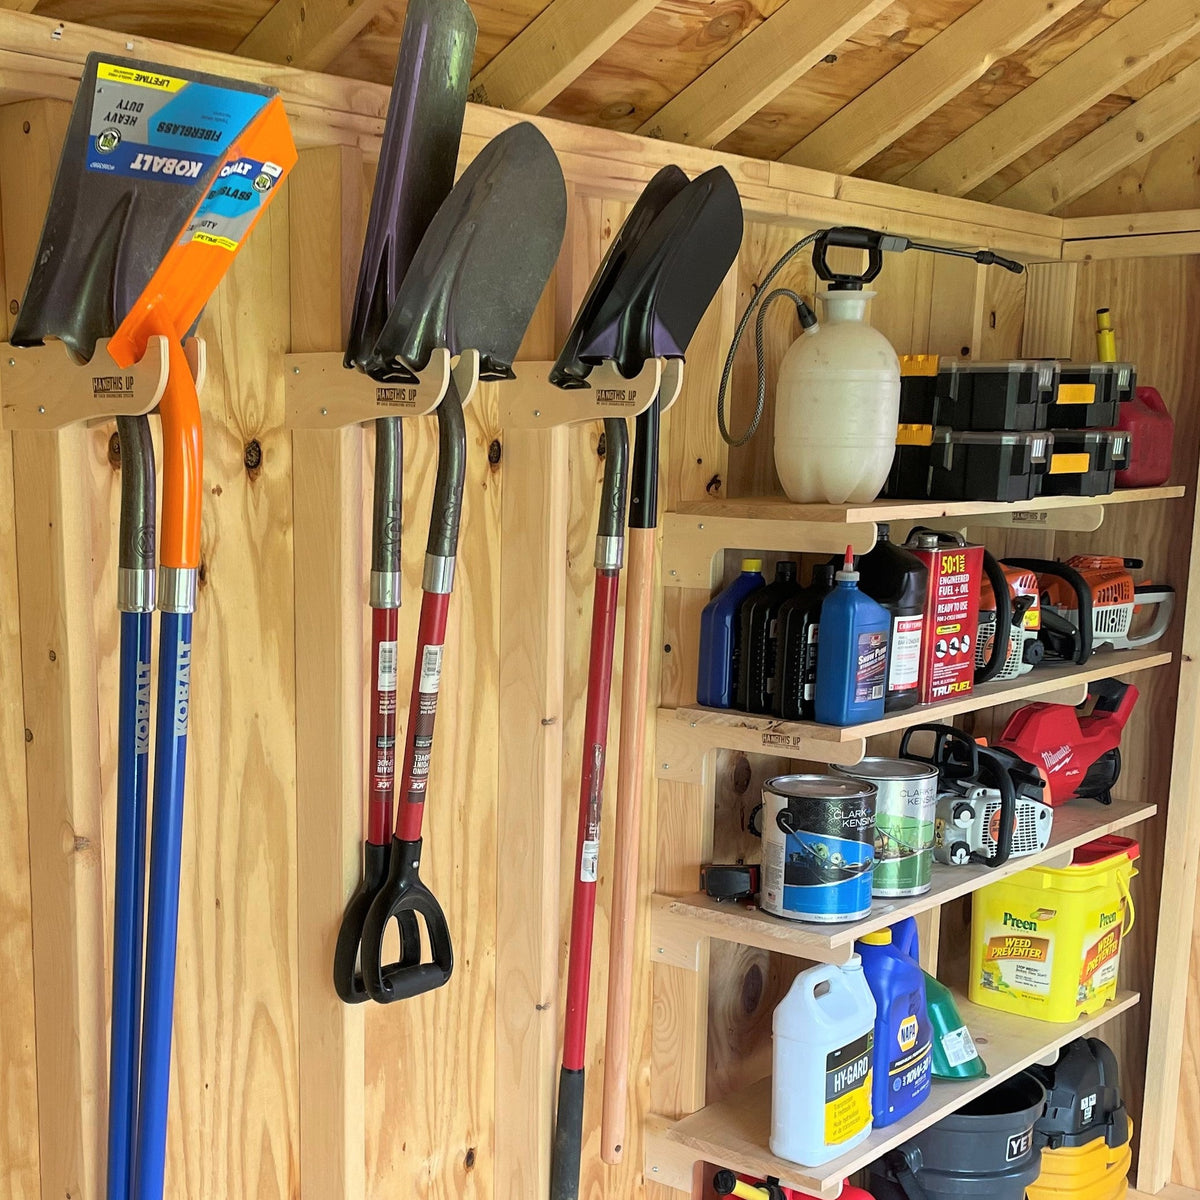 SUPER SALE: Universal Garden Tool Organizer - Shed Organization, Garde –  HangThis Up My Shed Organizing System